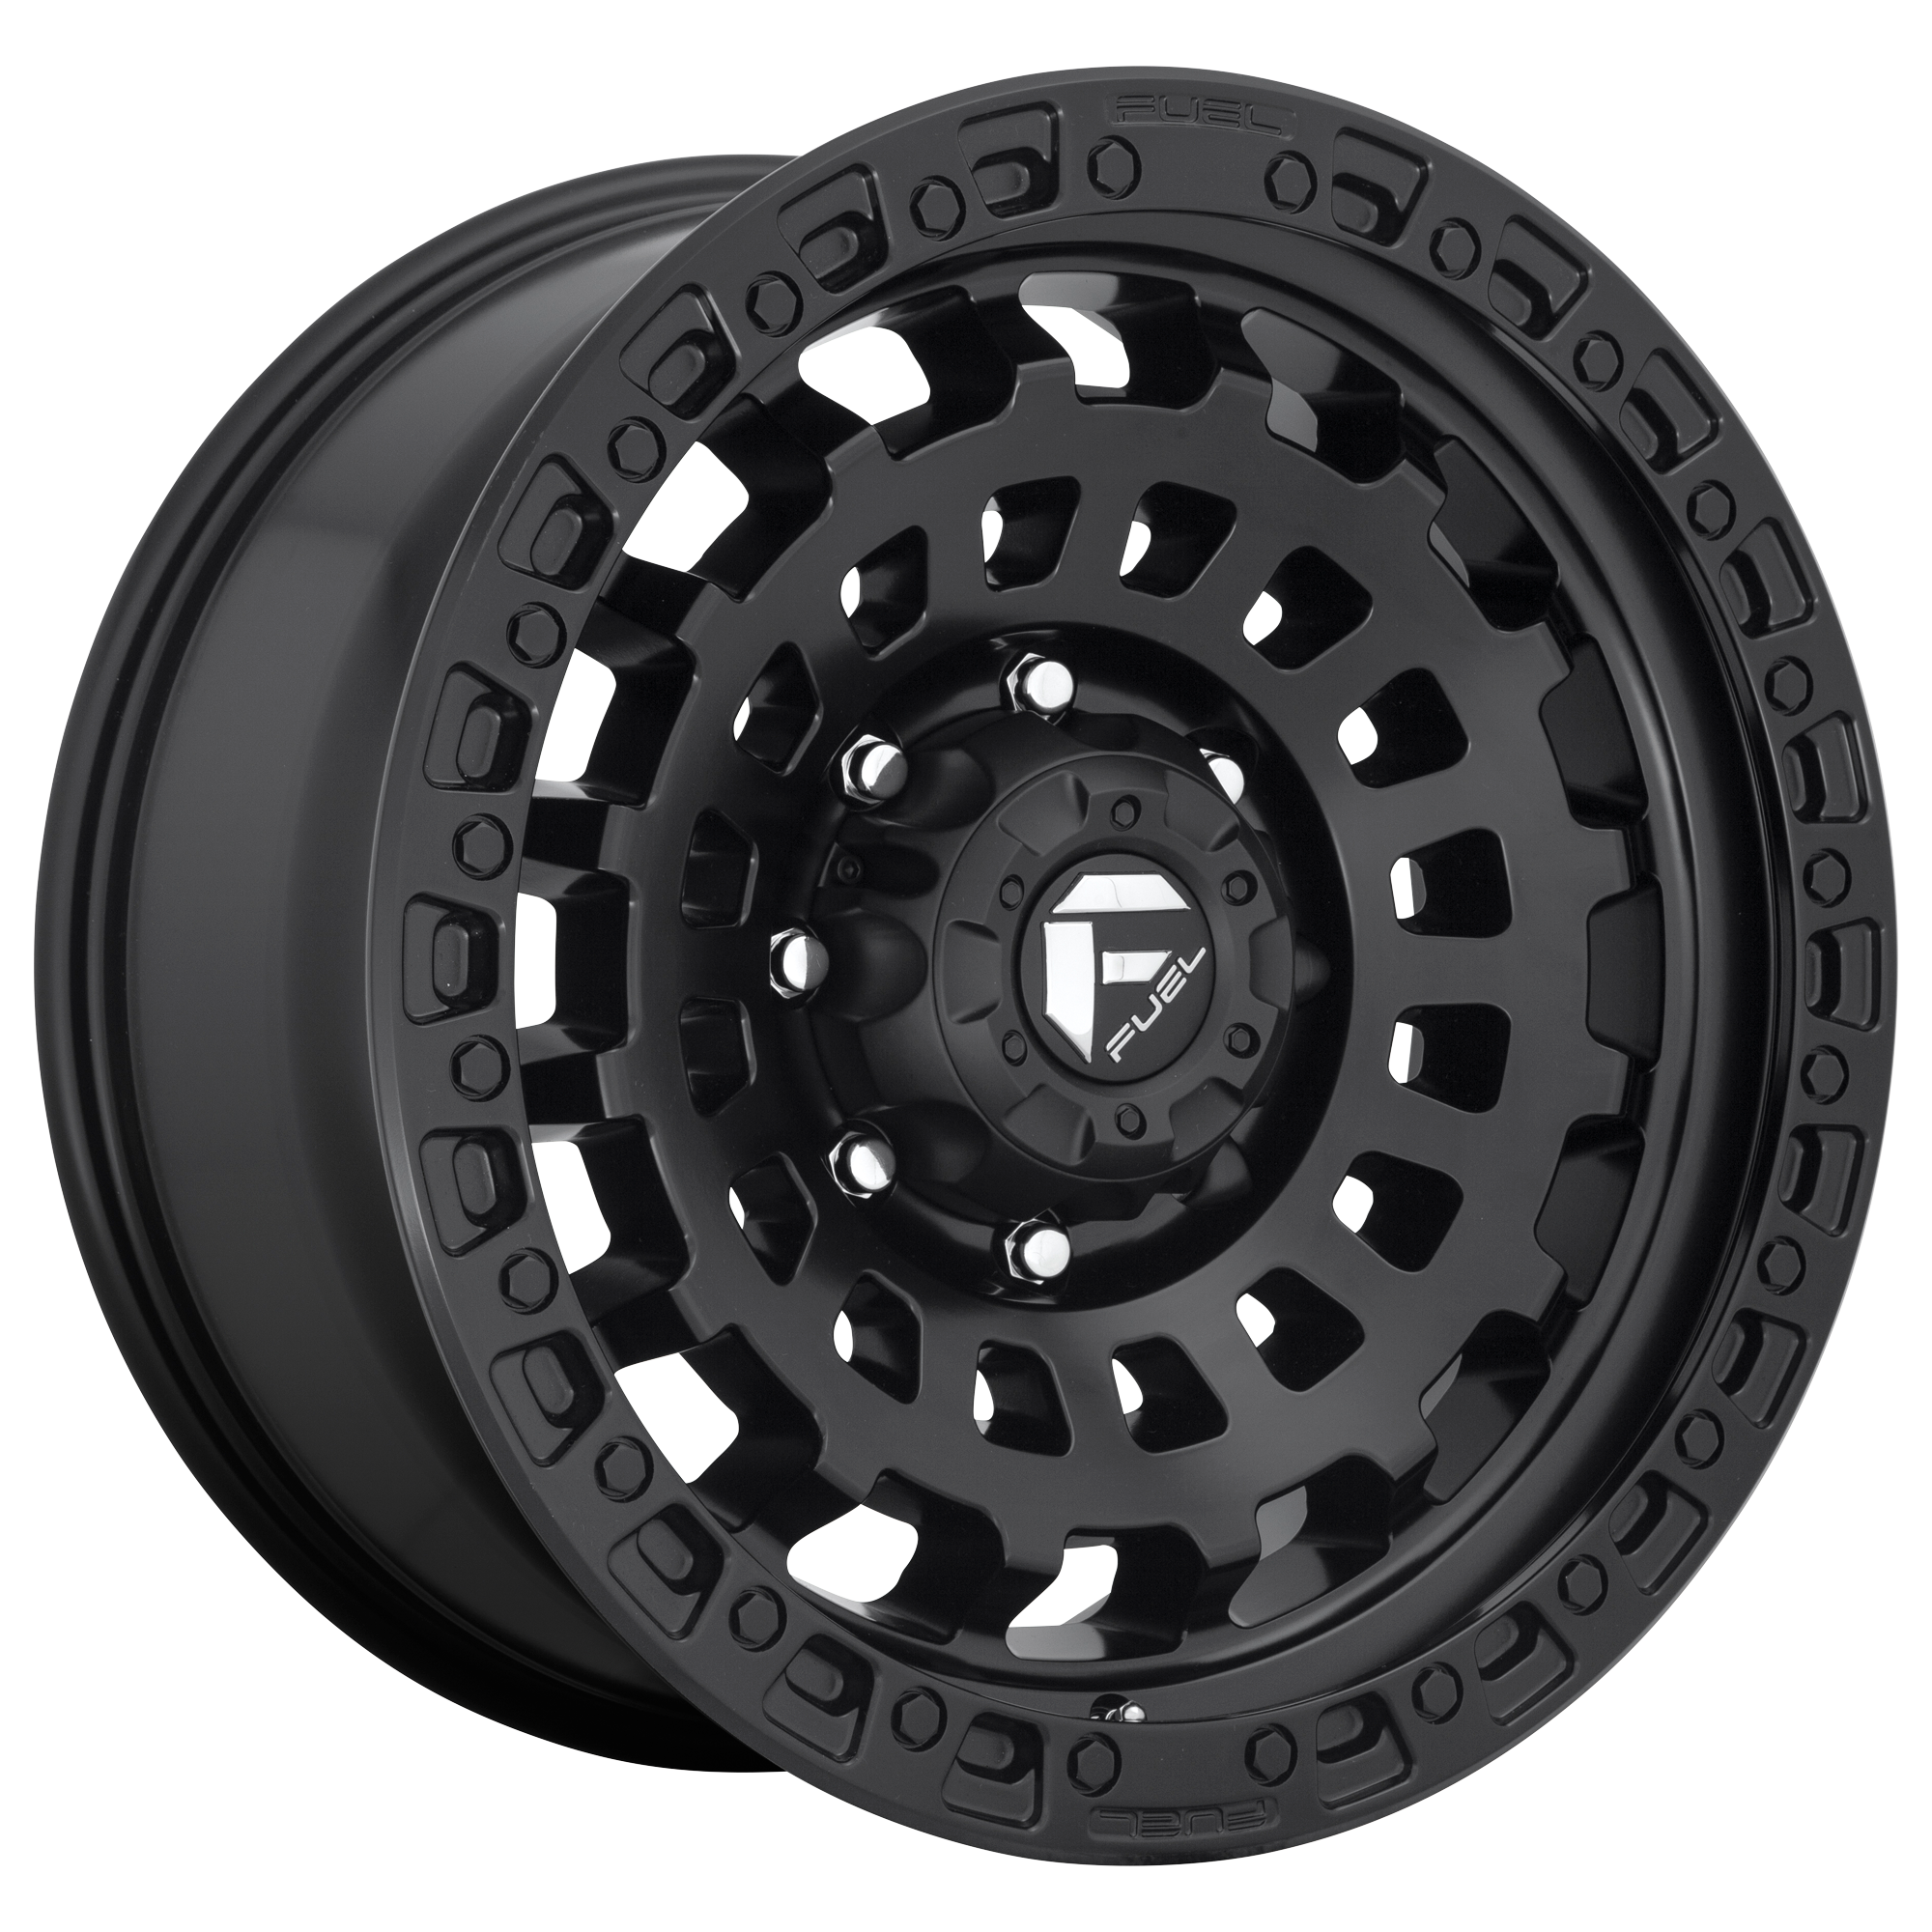 ZEPHYR 20x9 6x139.70 MATTE BLACK (20 mm) - Tires and Engine Performance